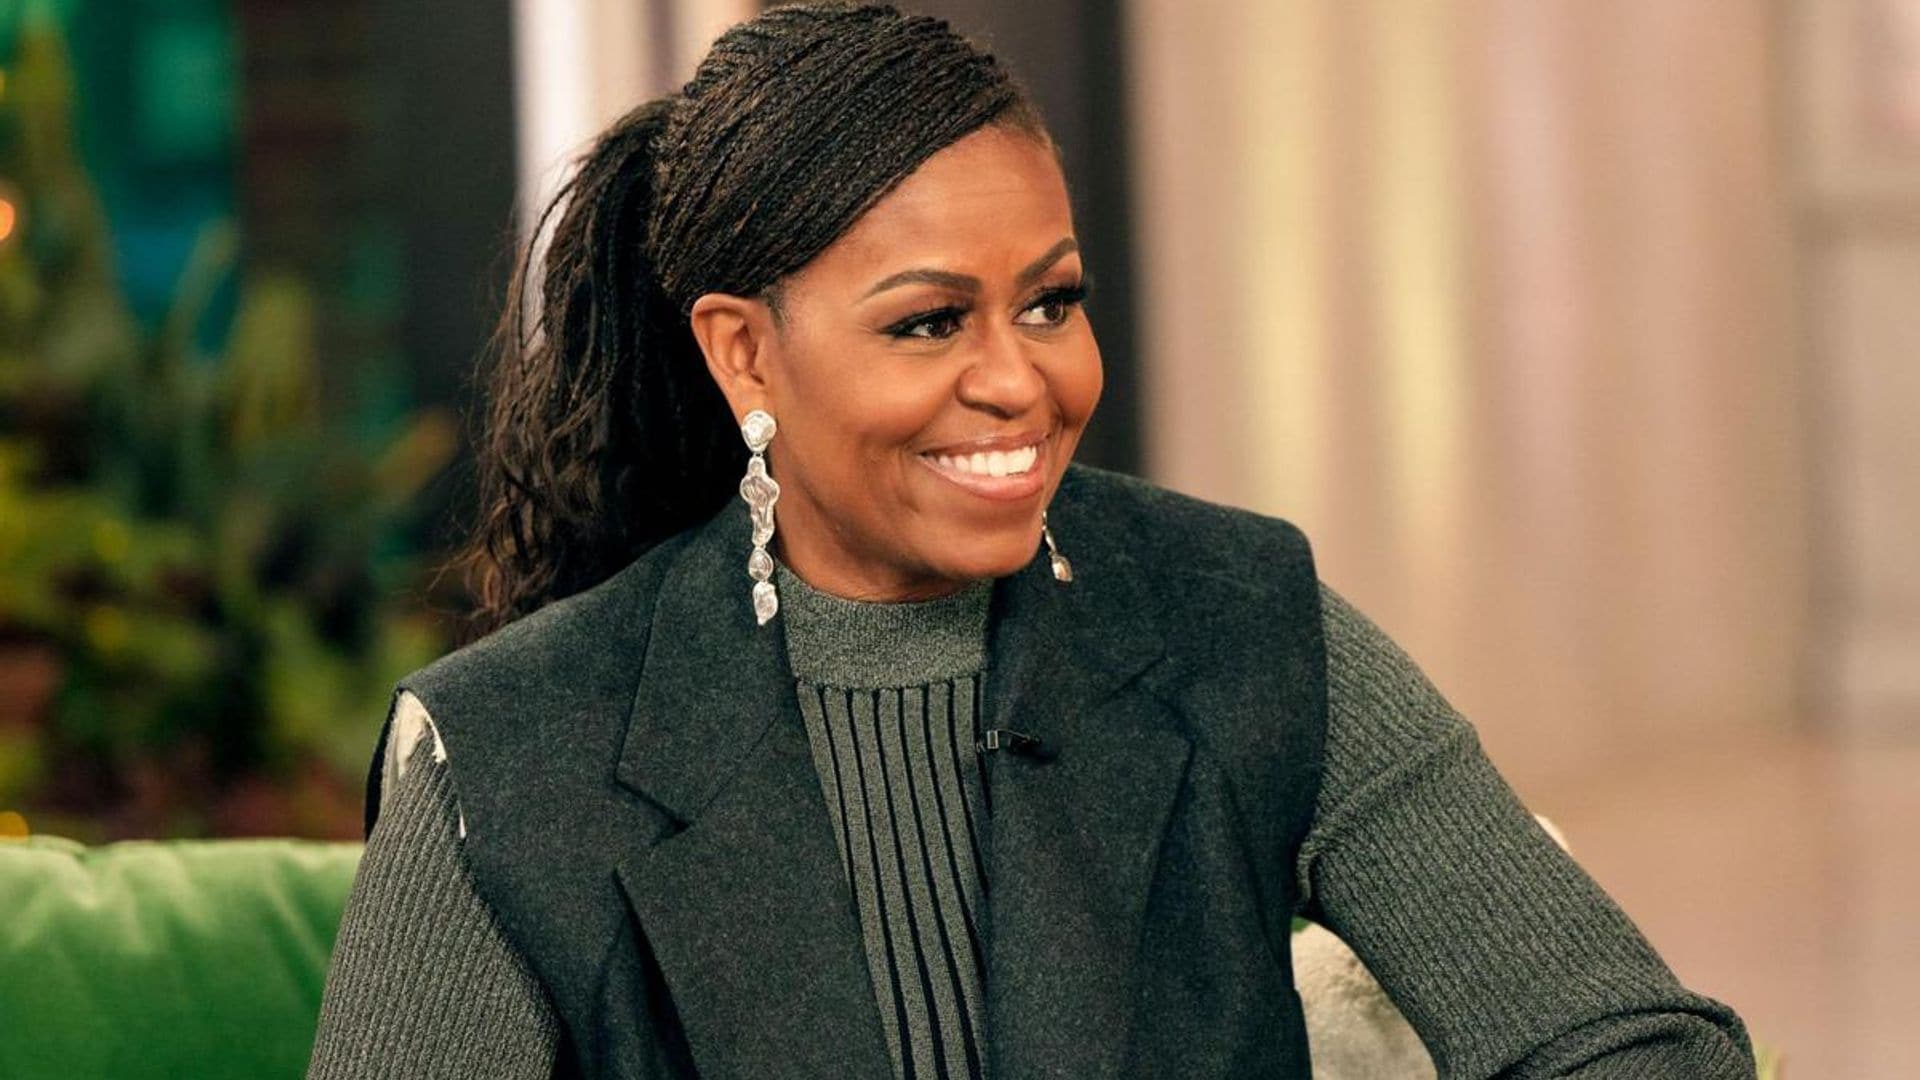 Michelle Obama talks about embracing a new stage of parenting